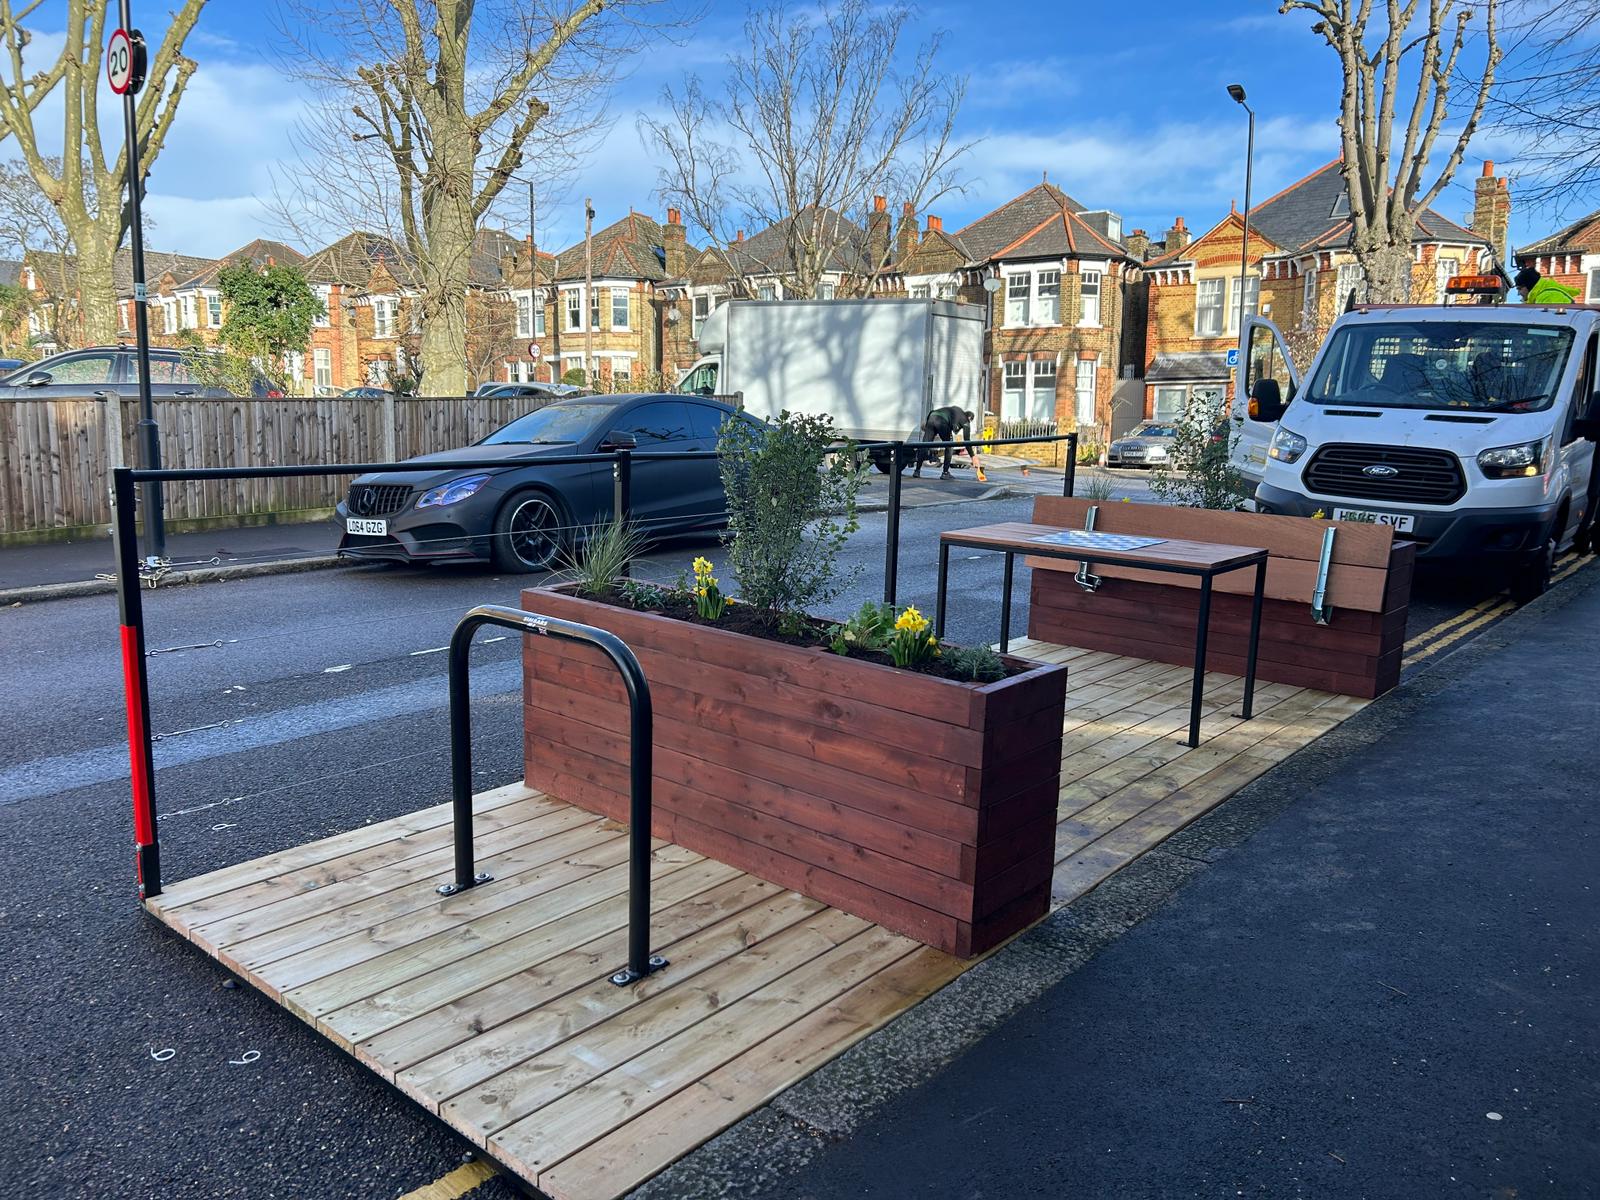 Lambeth invites residents to become Parklet Keepers